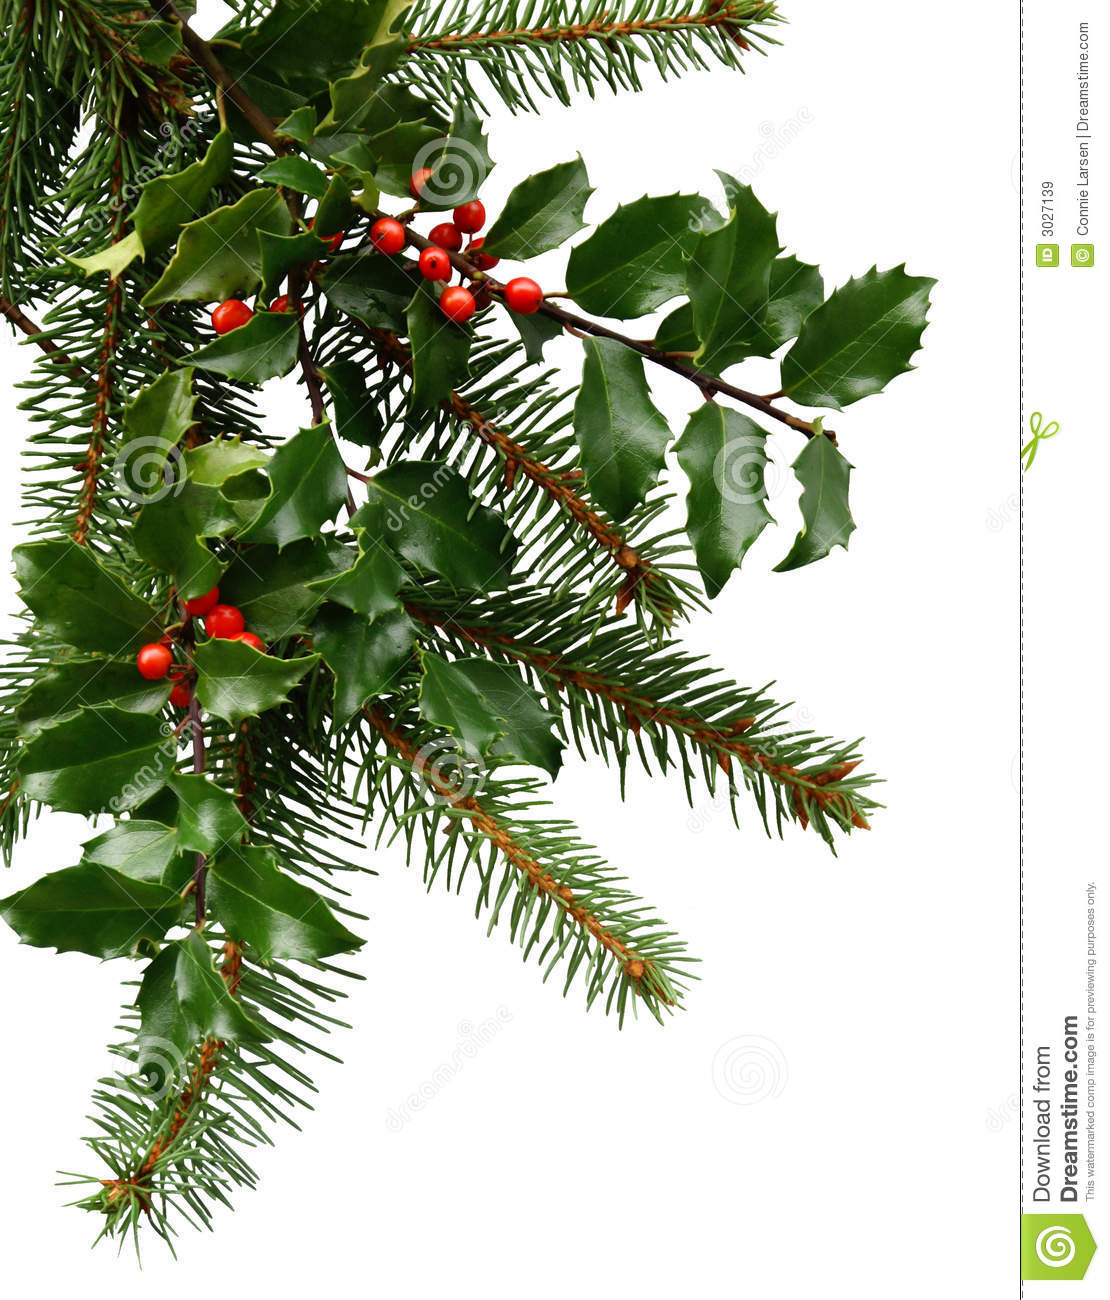 Evergreen boughs clipart 20 free Cliparts | Download images on